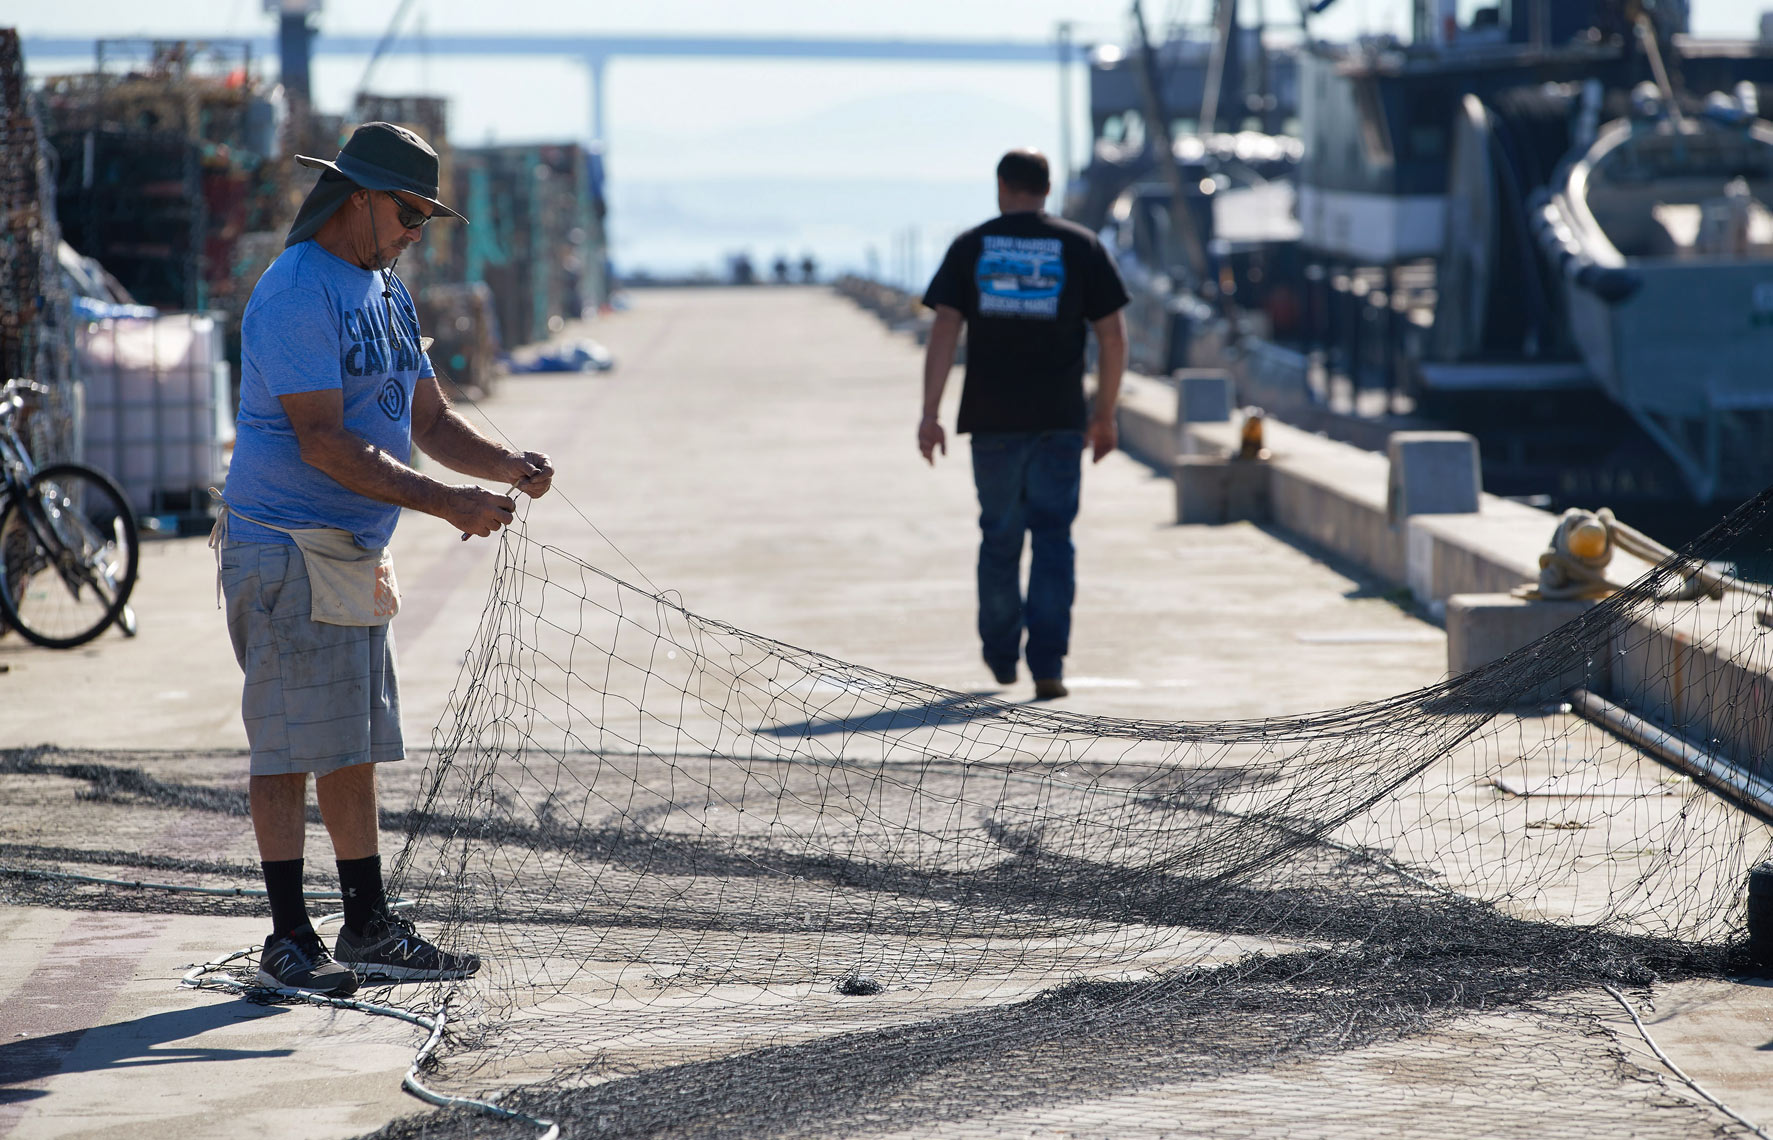 A Worker Repairs Fishing Nets on a Dock in San Diego